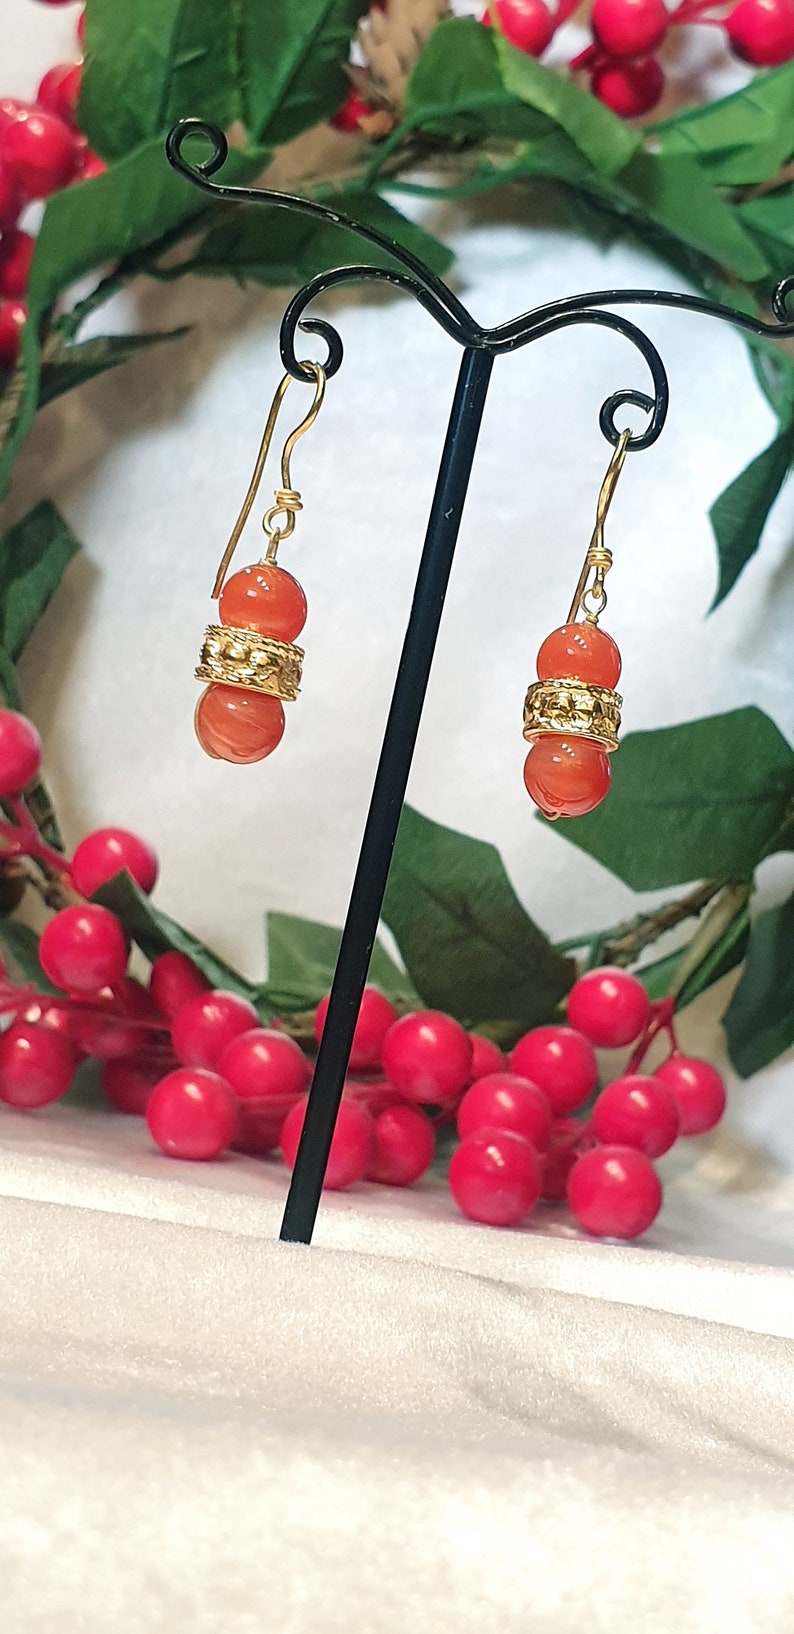 Antique style earrings with 24k gold plated center and pair of carnelian stones. image 4